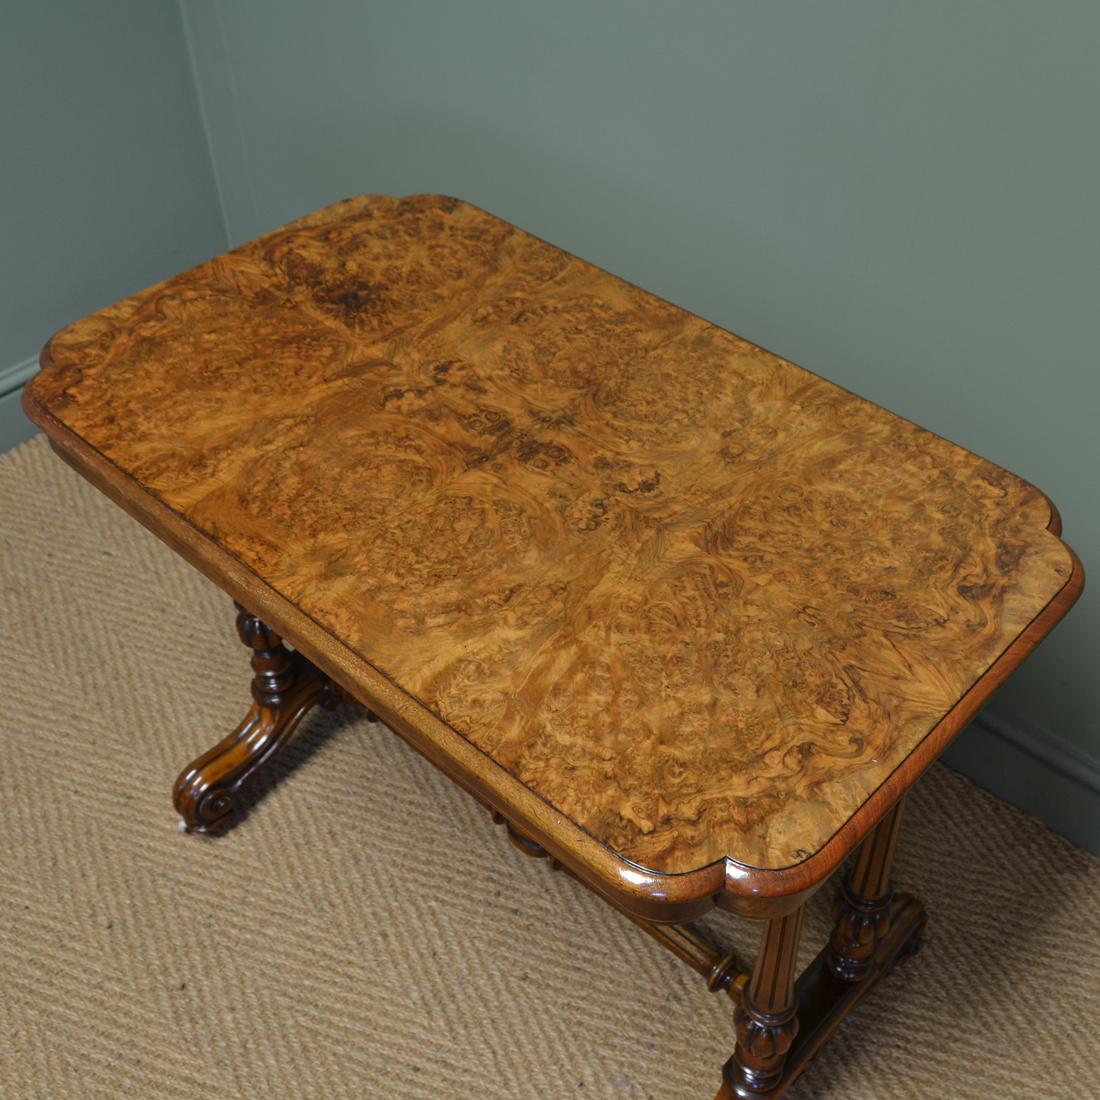 Striking Victorian figured golden burr walnut antique centre / side / writing table.

This striking Victorian figured golden burr walnut antique centre / side / writing table is extremely versatile and dates from circa 1860. It has a beautifully